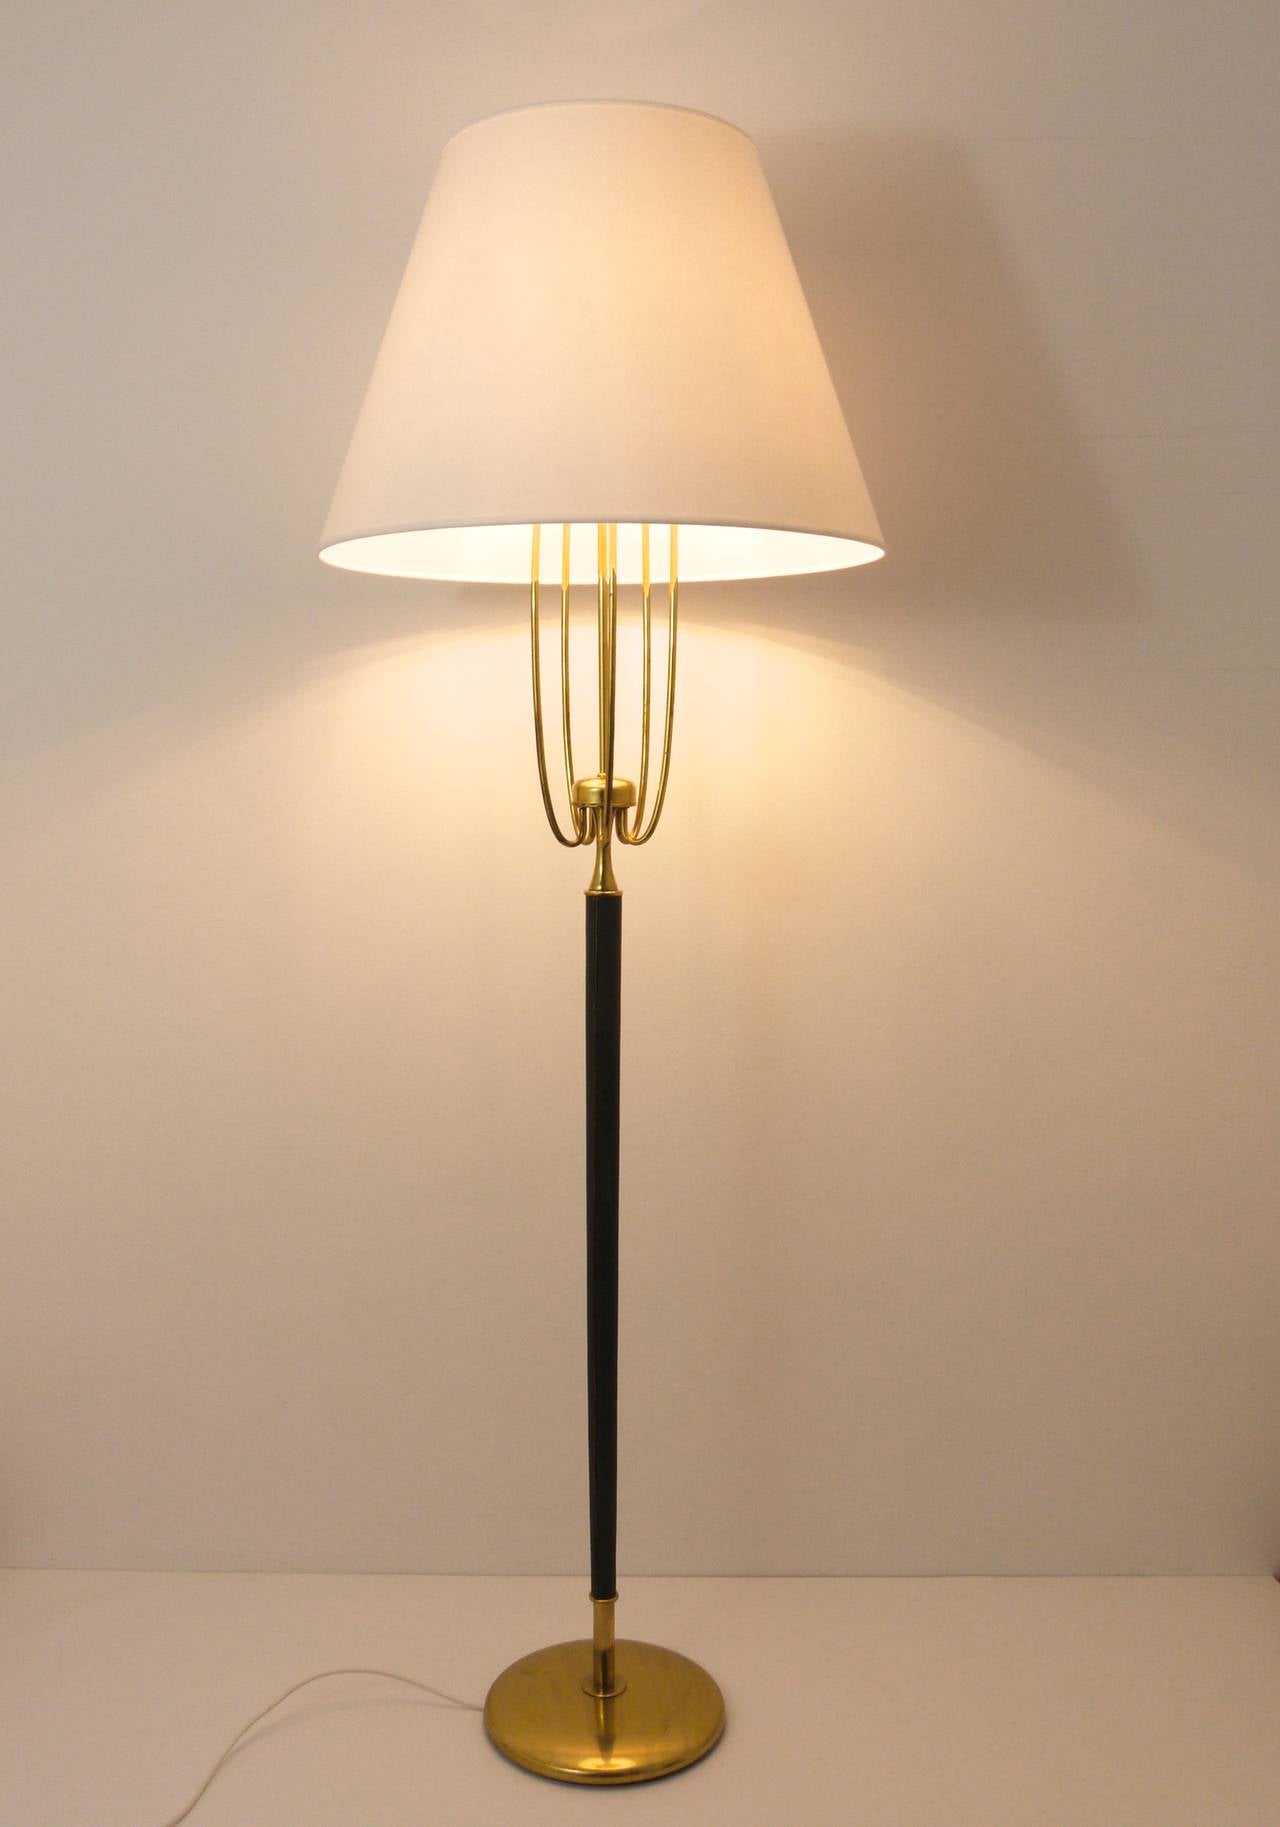 An elegant and unusual Austrian modernist floor lamp from the 1950s in the style of Josef Frank. Very beautiful, has five brass arms, a green, leather wrapped tapered stem and nice brass details. In very good condition with marginal patina.